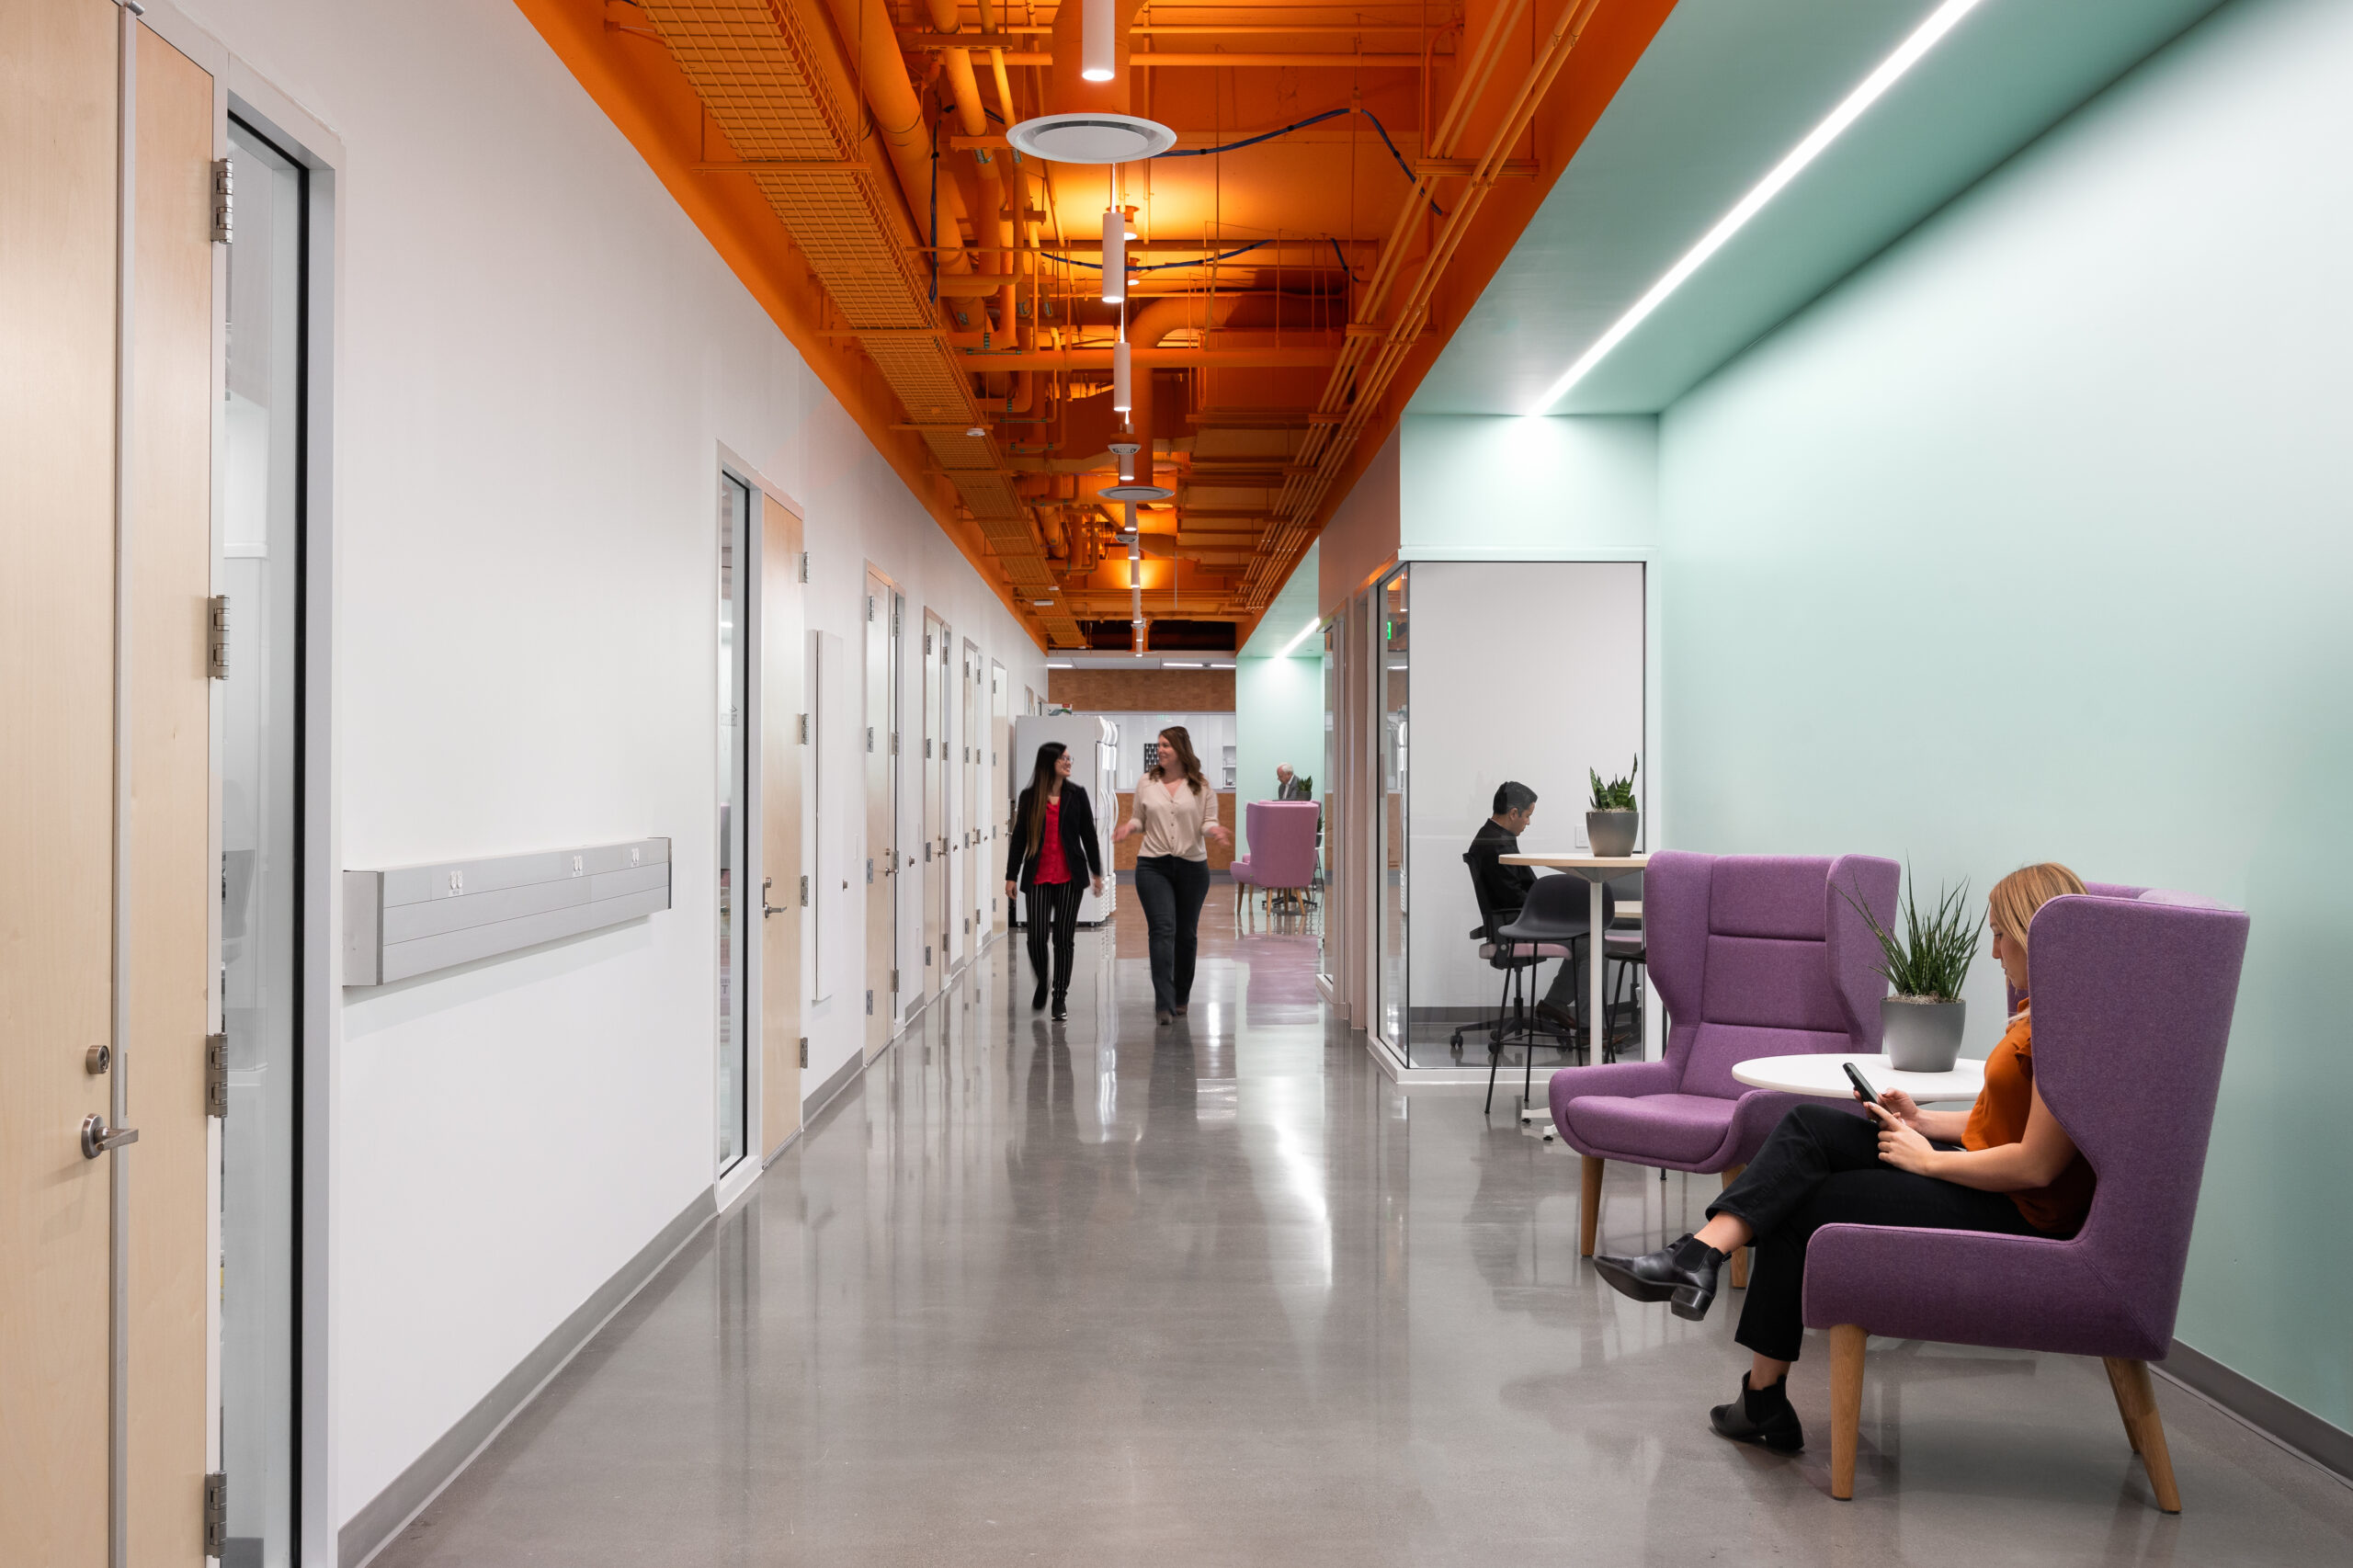 Three emerging growth companies move to Connect Labs by Wexford PHX